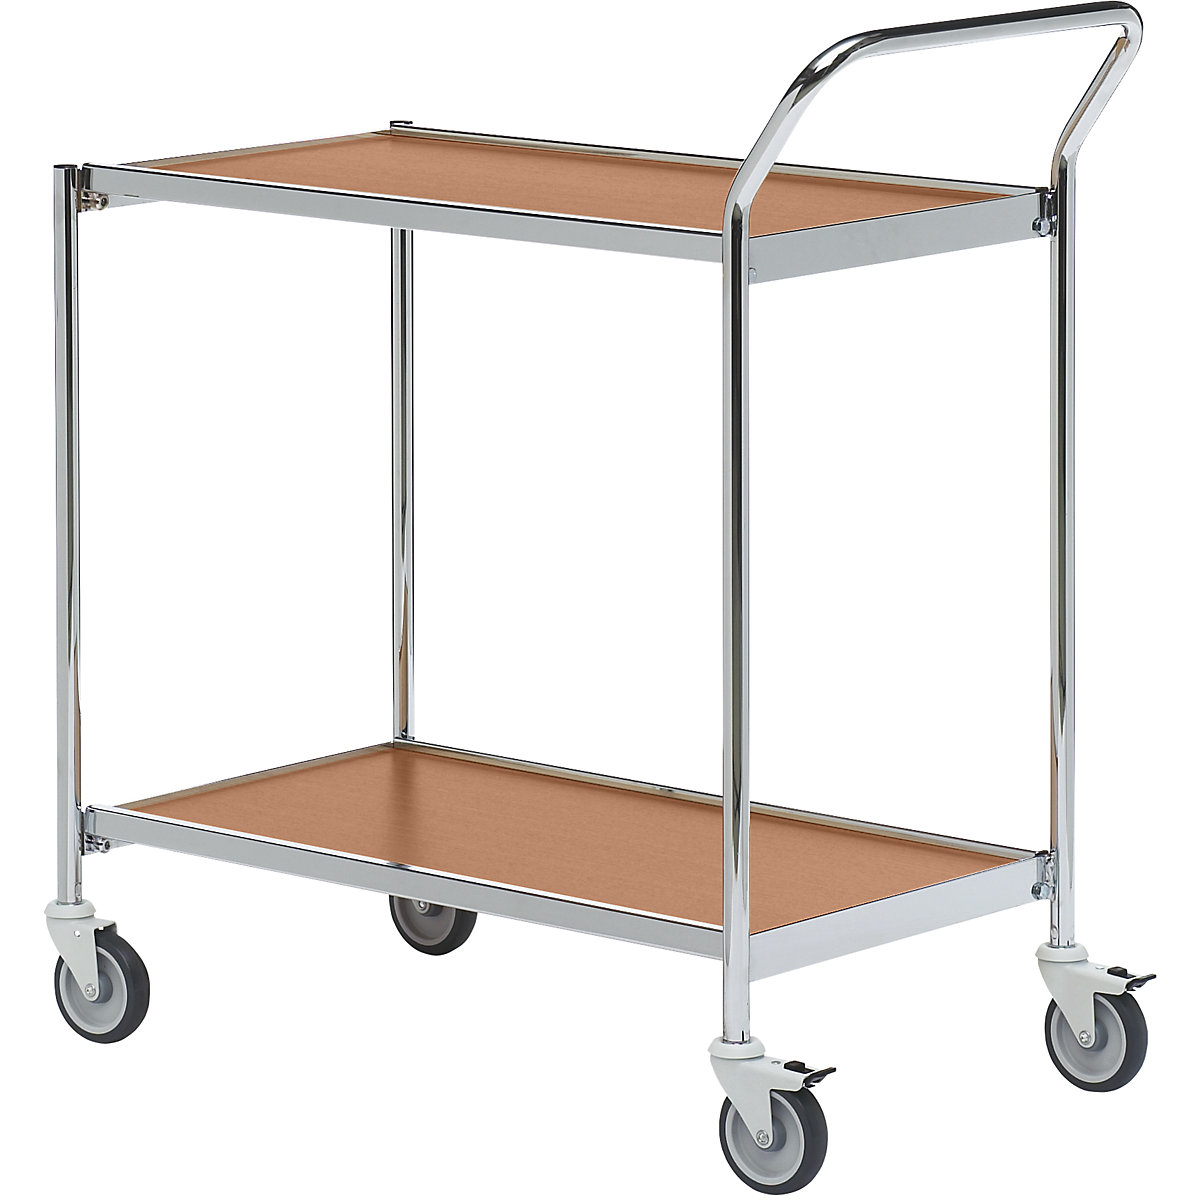 Table trolley – HelgeNyberg, 2 shelves, LxW 800 x 420 mm, chrome/beech, 5+ items-33